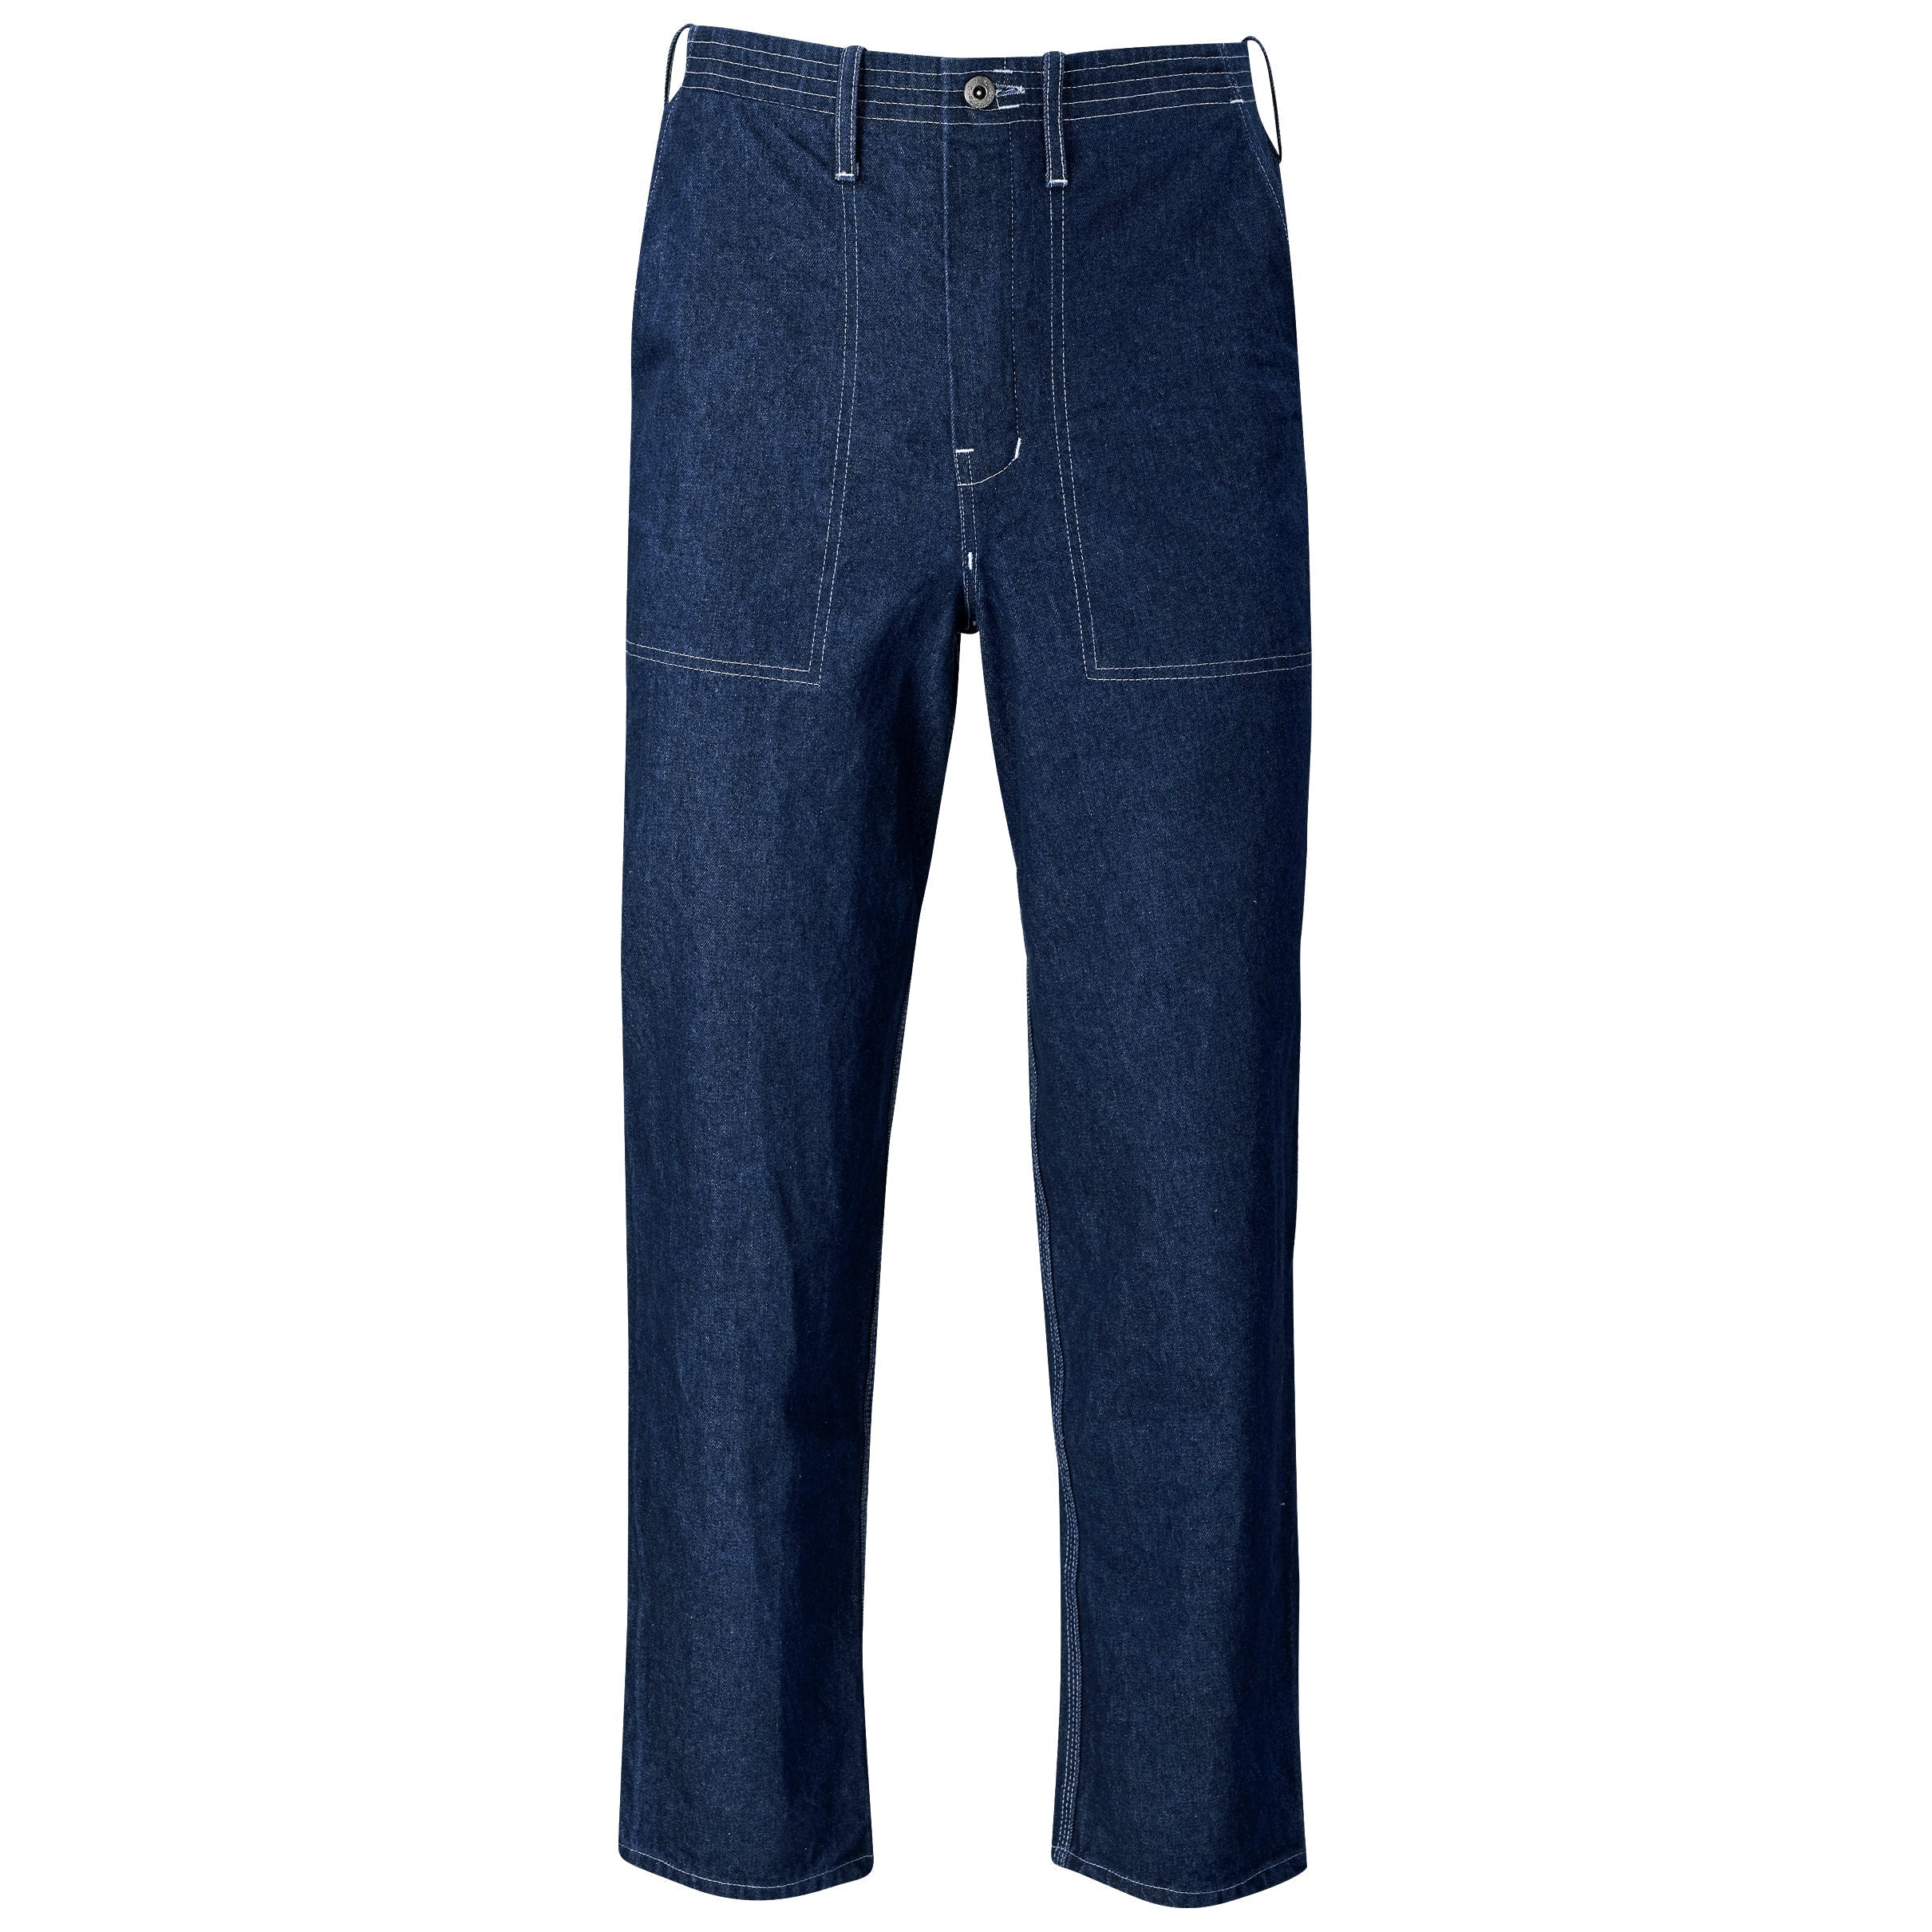 Plain Blue Men's Regular Fit 100% Cotton Knitted Denim Jeans With China  Wash at Rs 500/piece in Agra